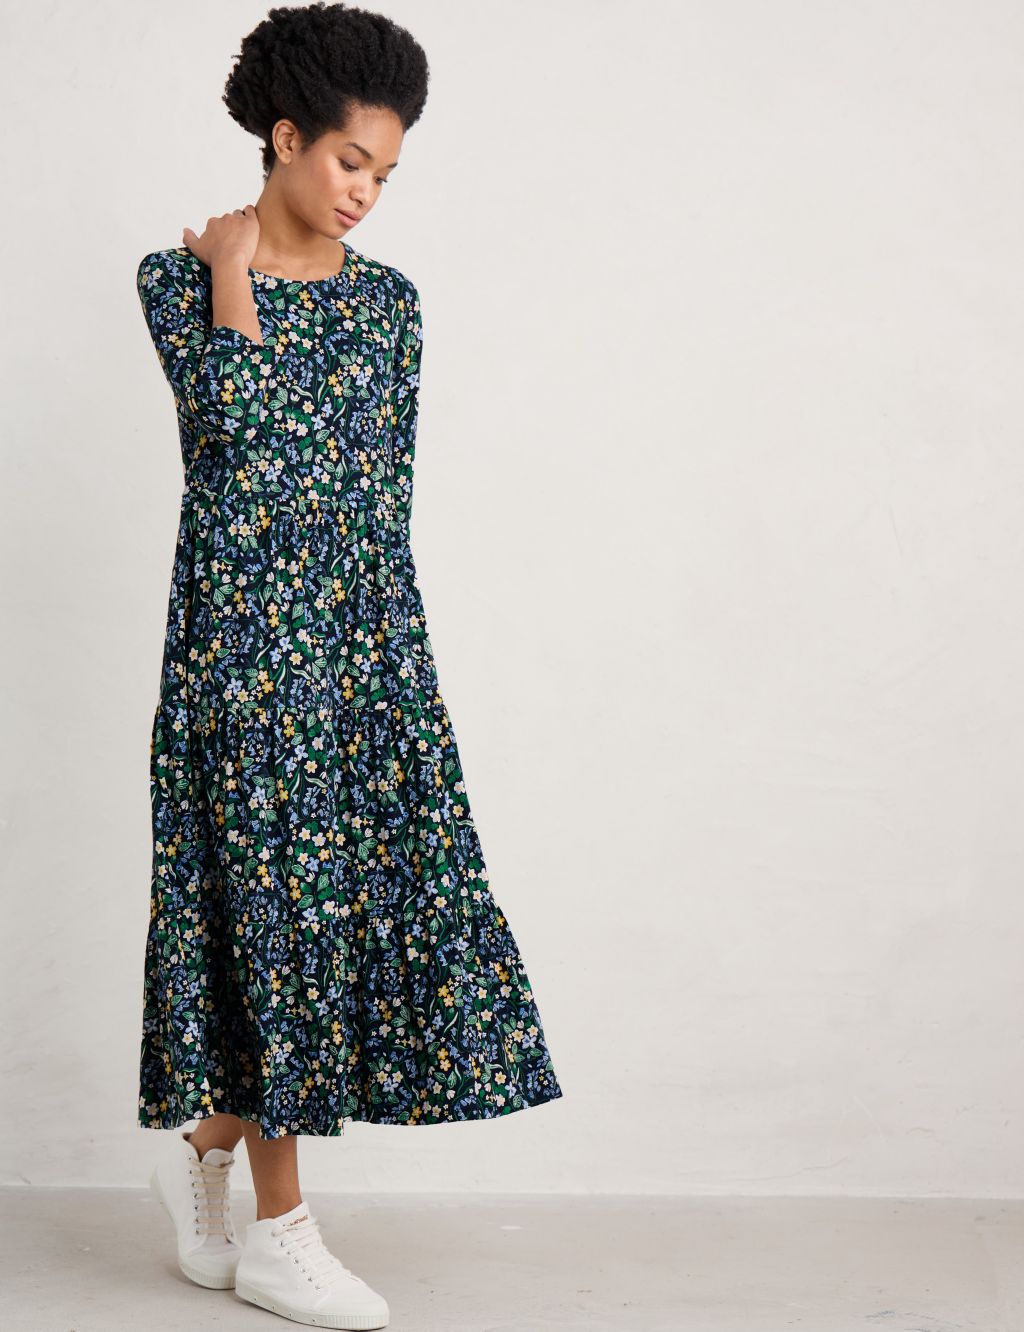 Organic Cotton Floral Midaxi Tiered Dress image 1